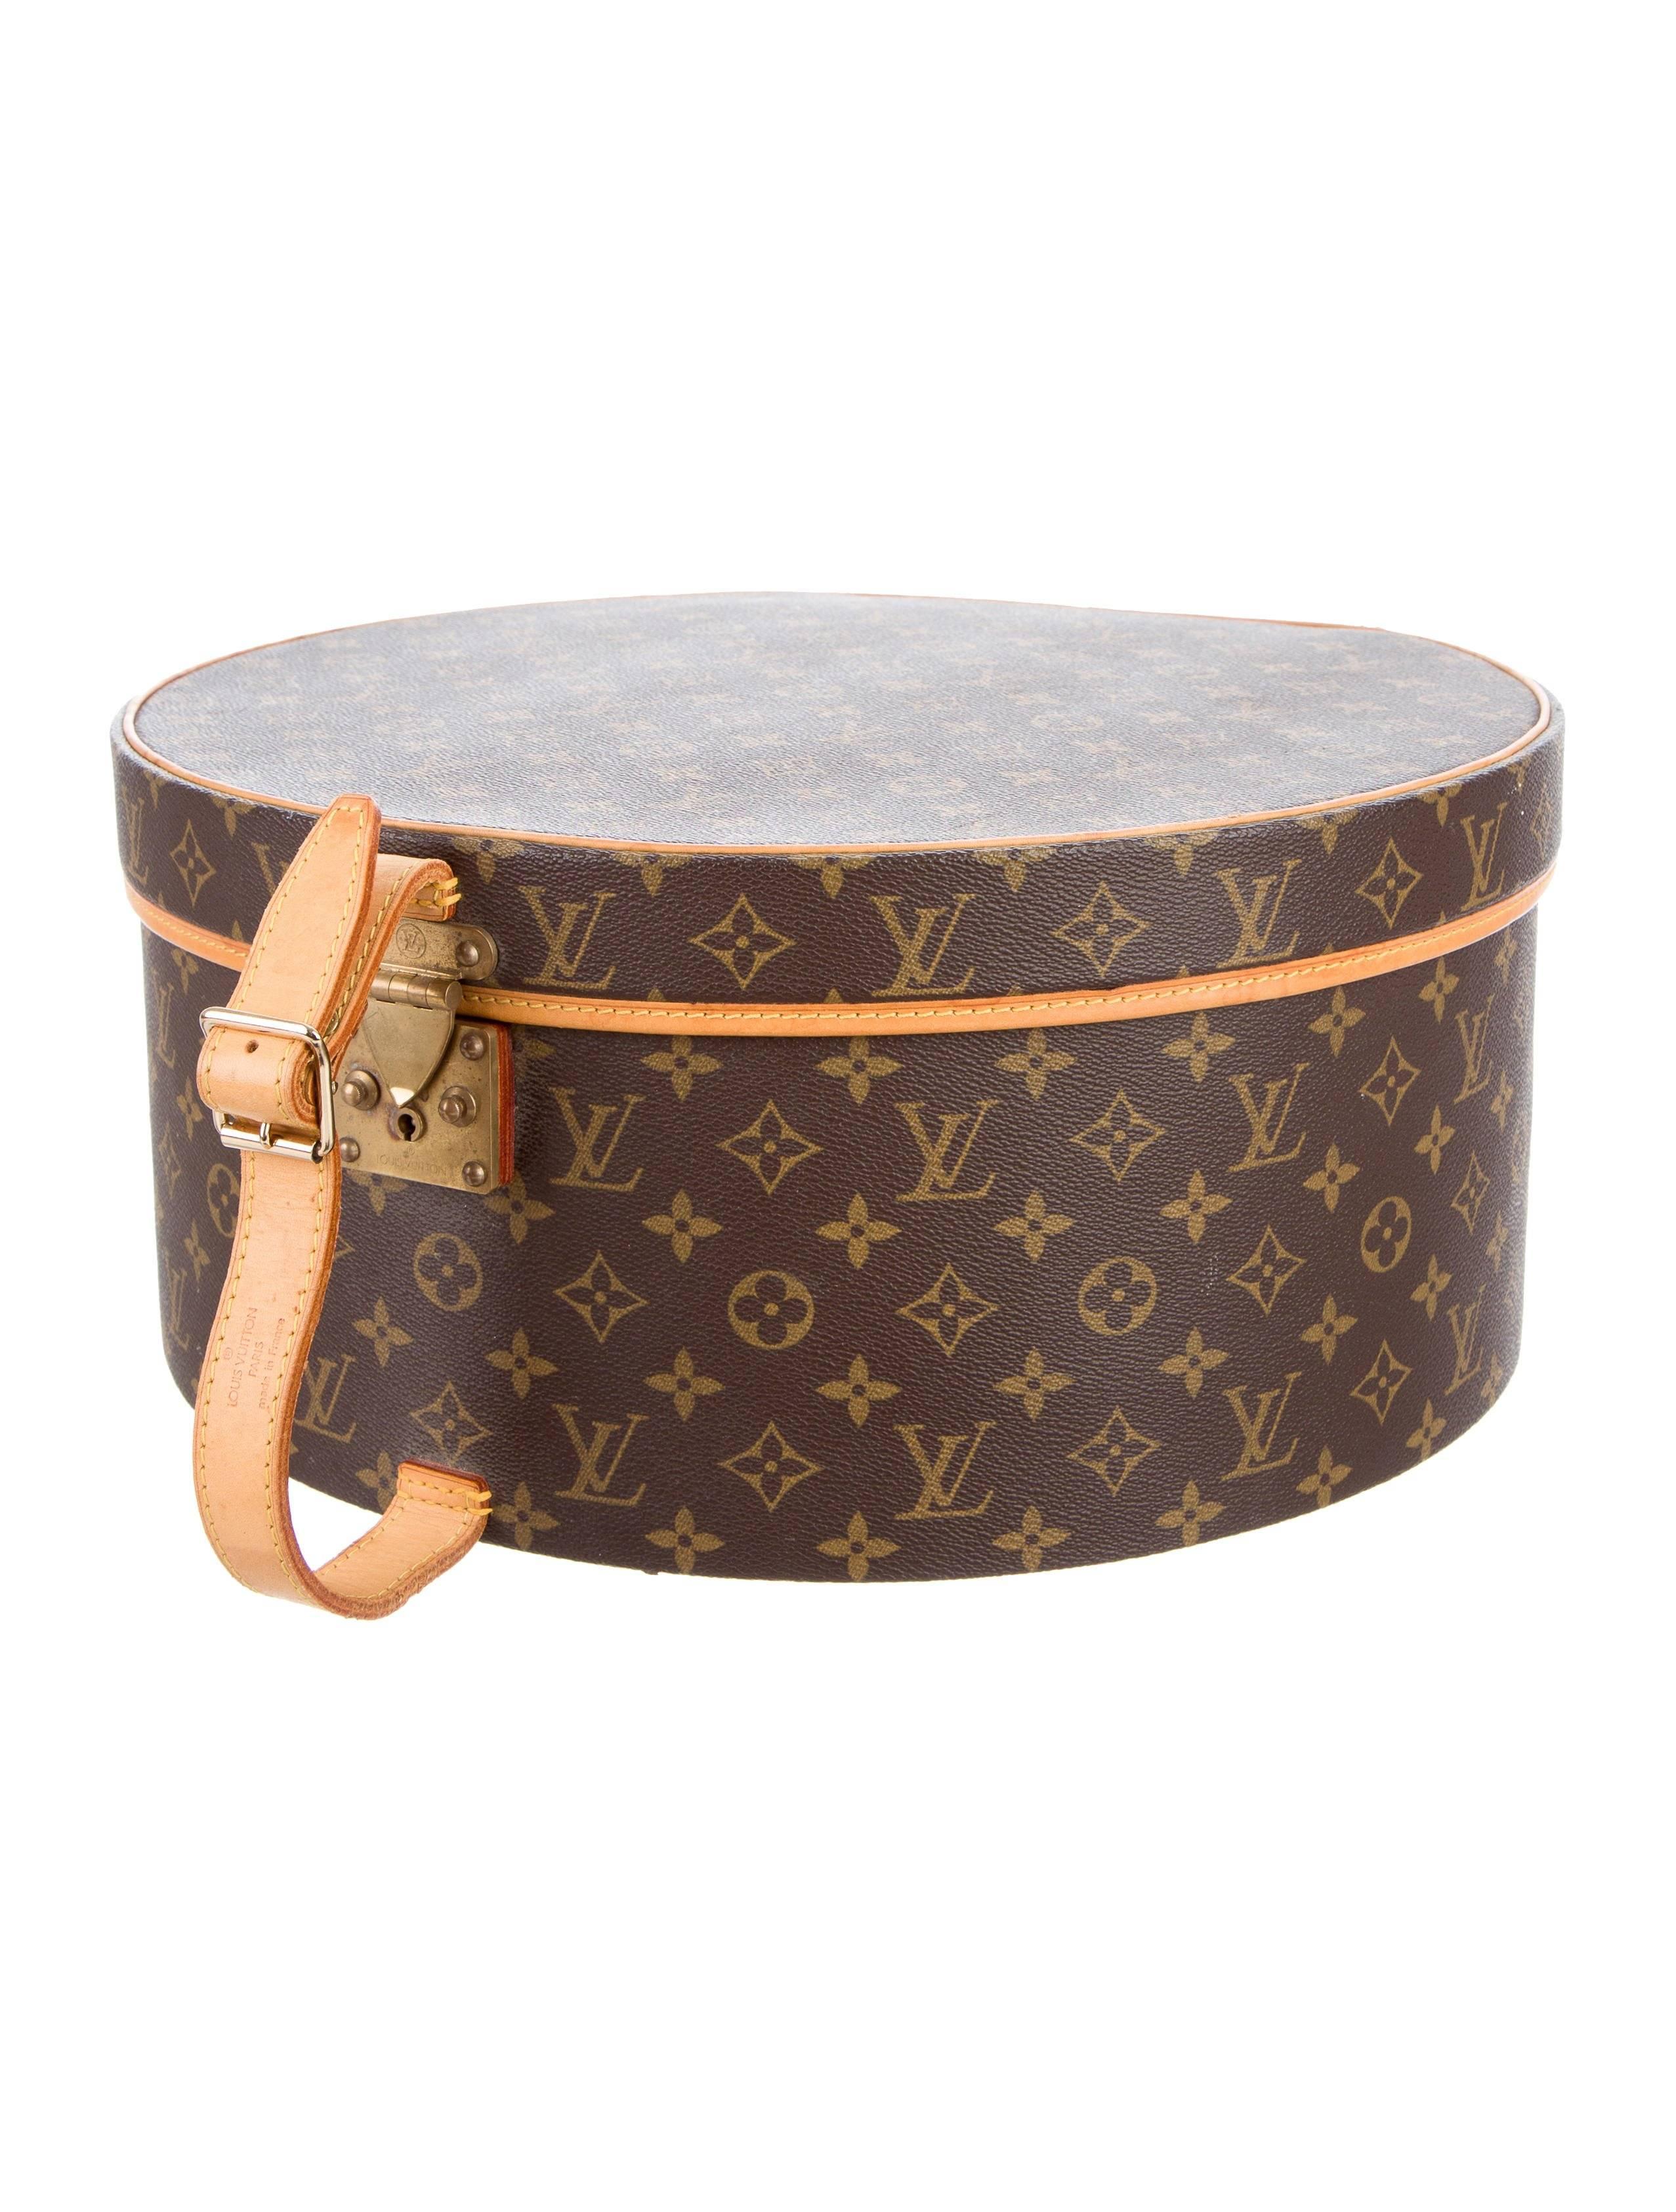 CURATOR'S NOTES

Louis Vuitton Monogram Canvas Hat Travel Storage CarryOn Top Handle  Case Box 

Monogram canvas 
Leather trim
Canvas lining
Brass hardware
Push lock closure
Date code present
Made in France
Measures 16" W x 15" H x 8"